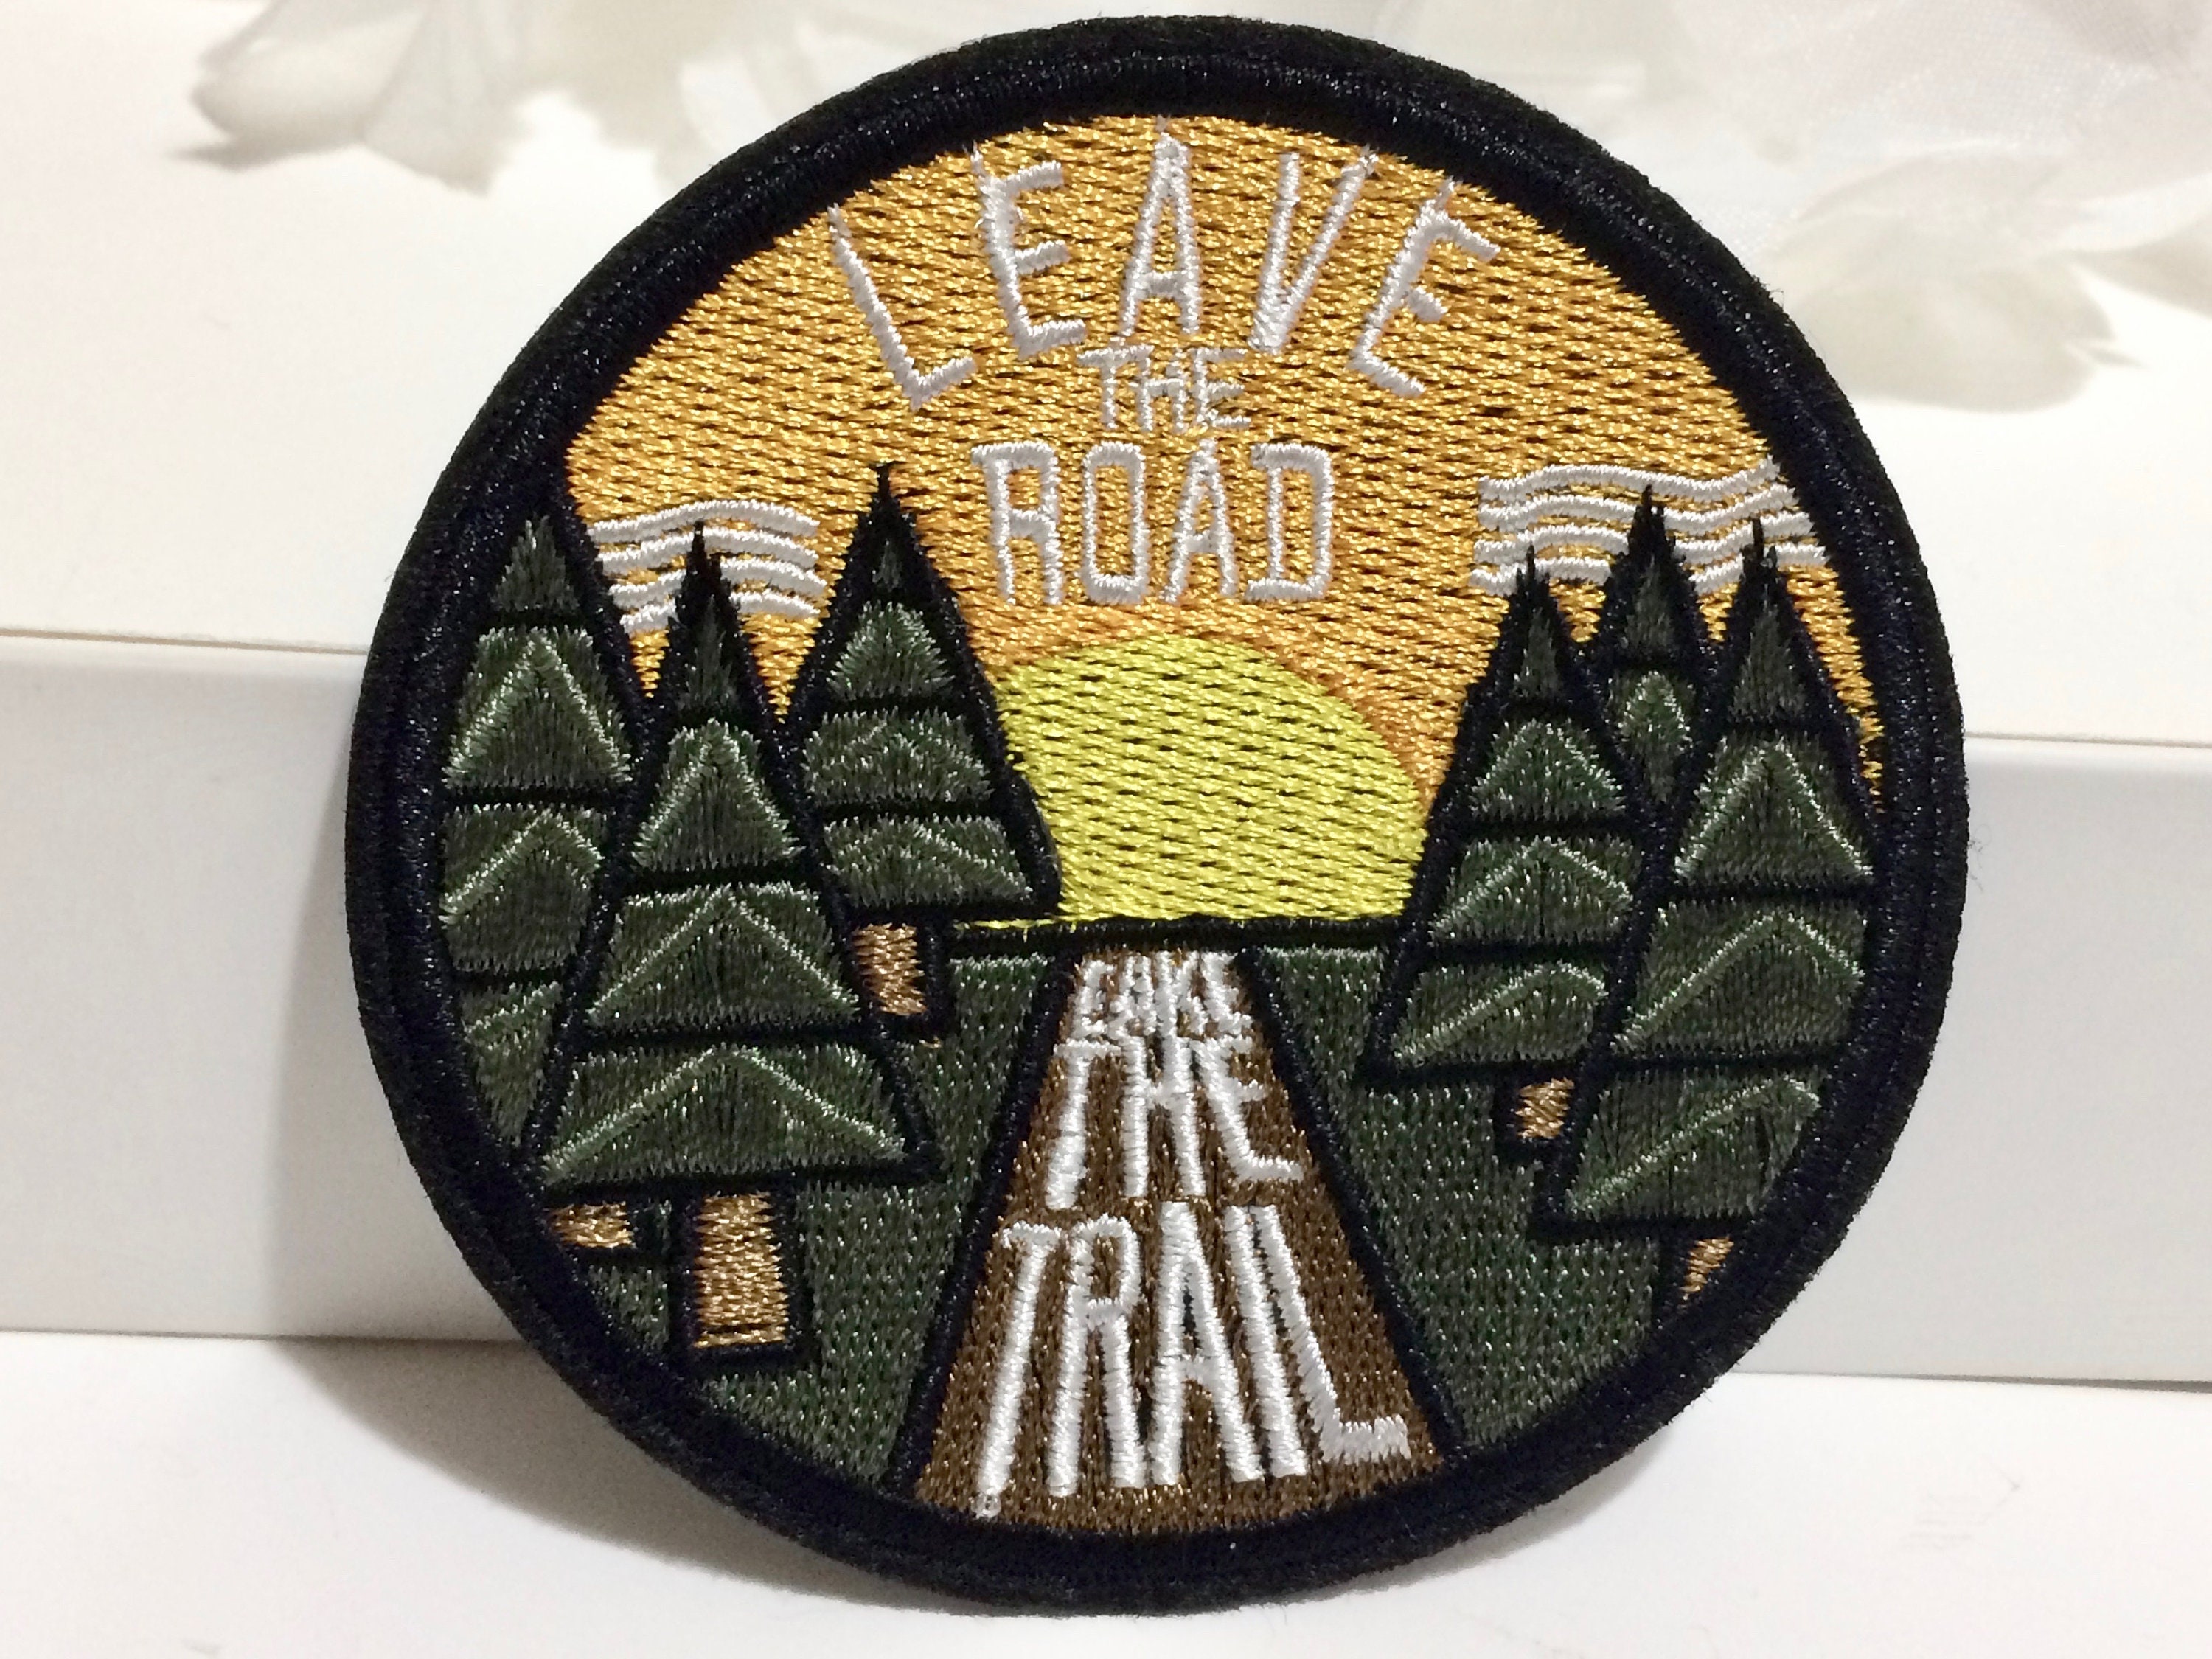 Get Away sew-on patch